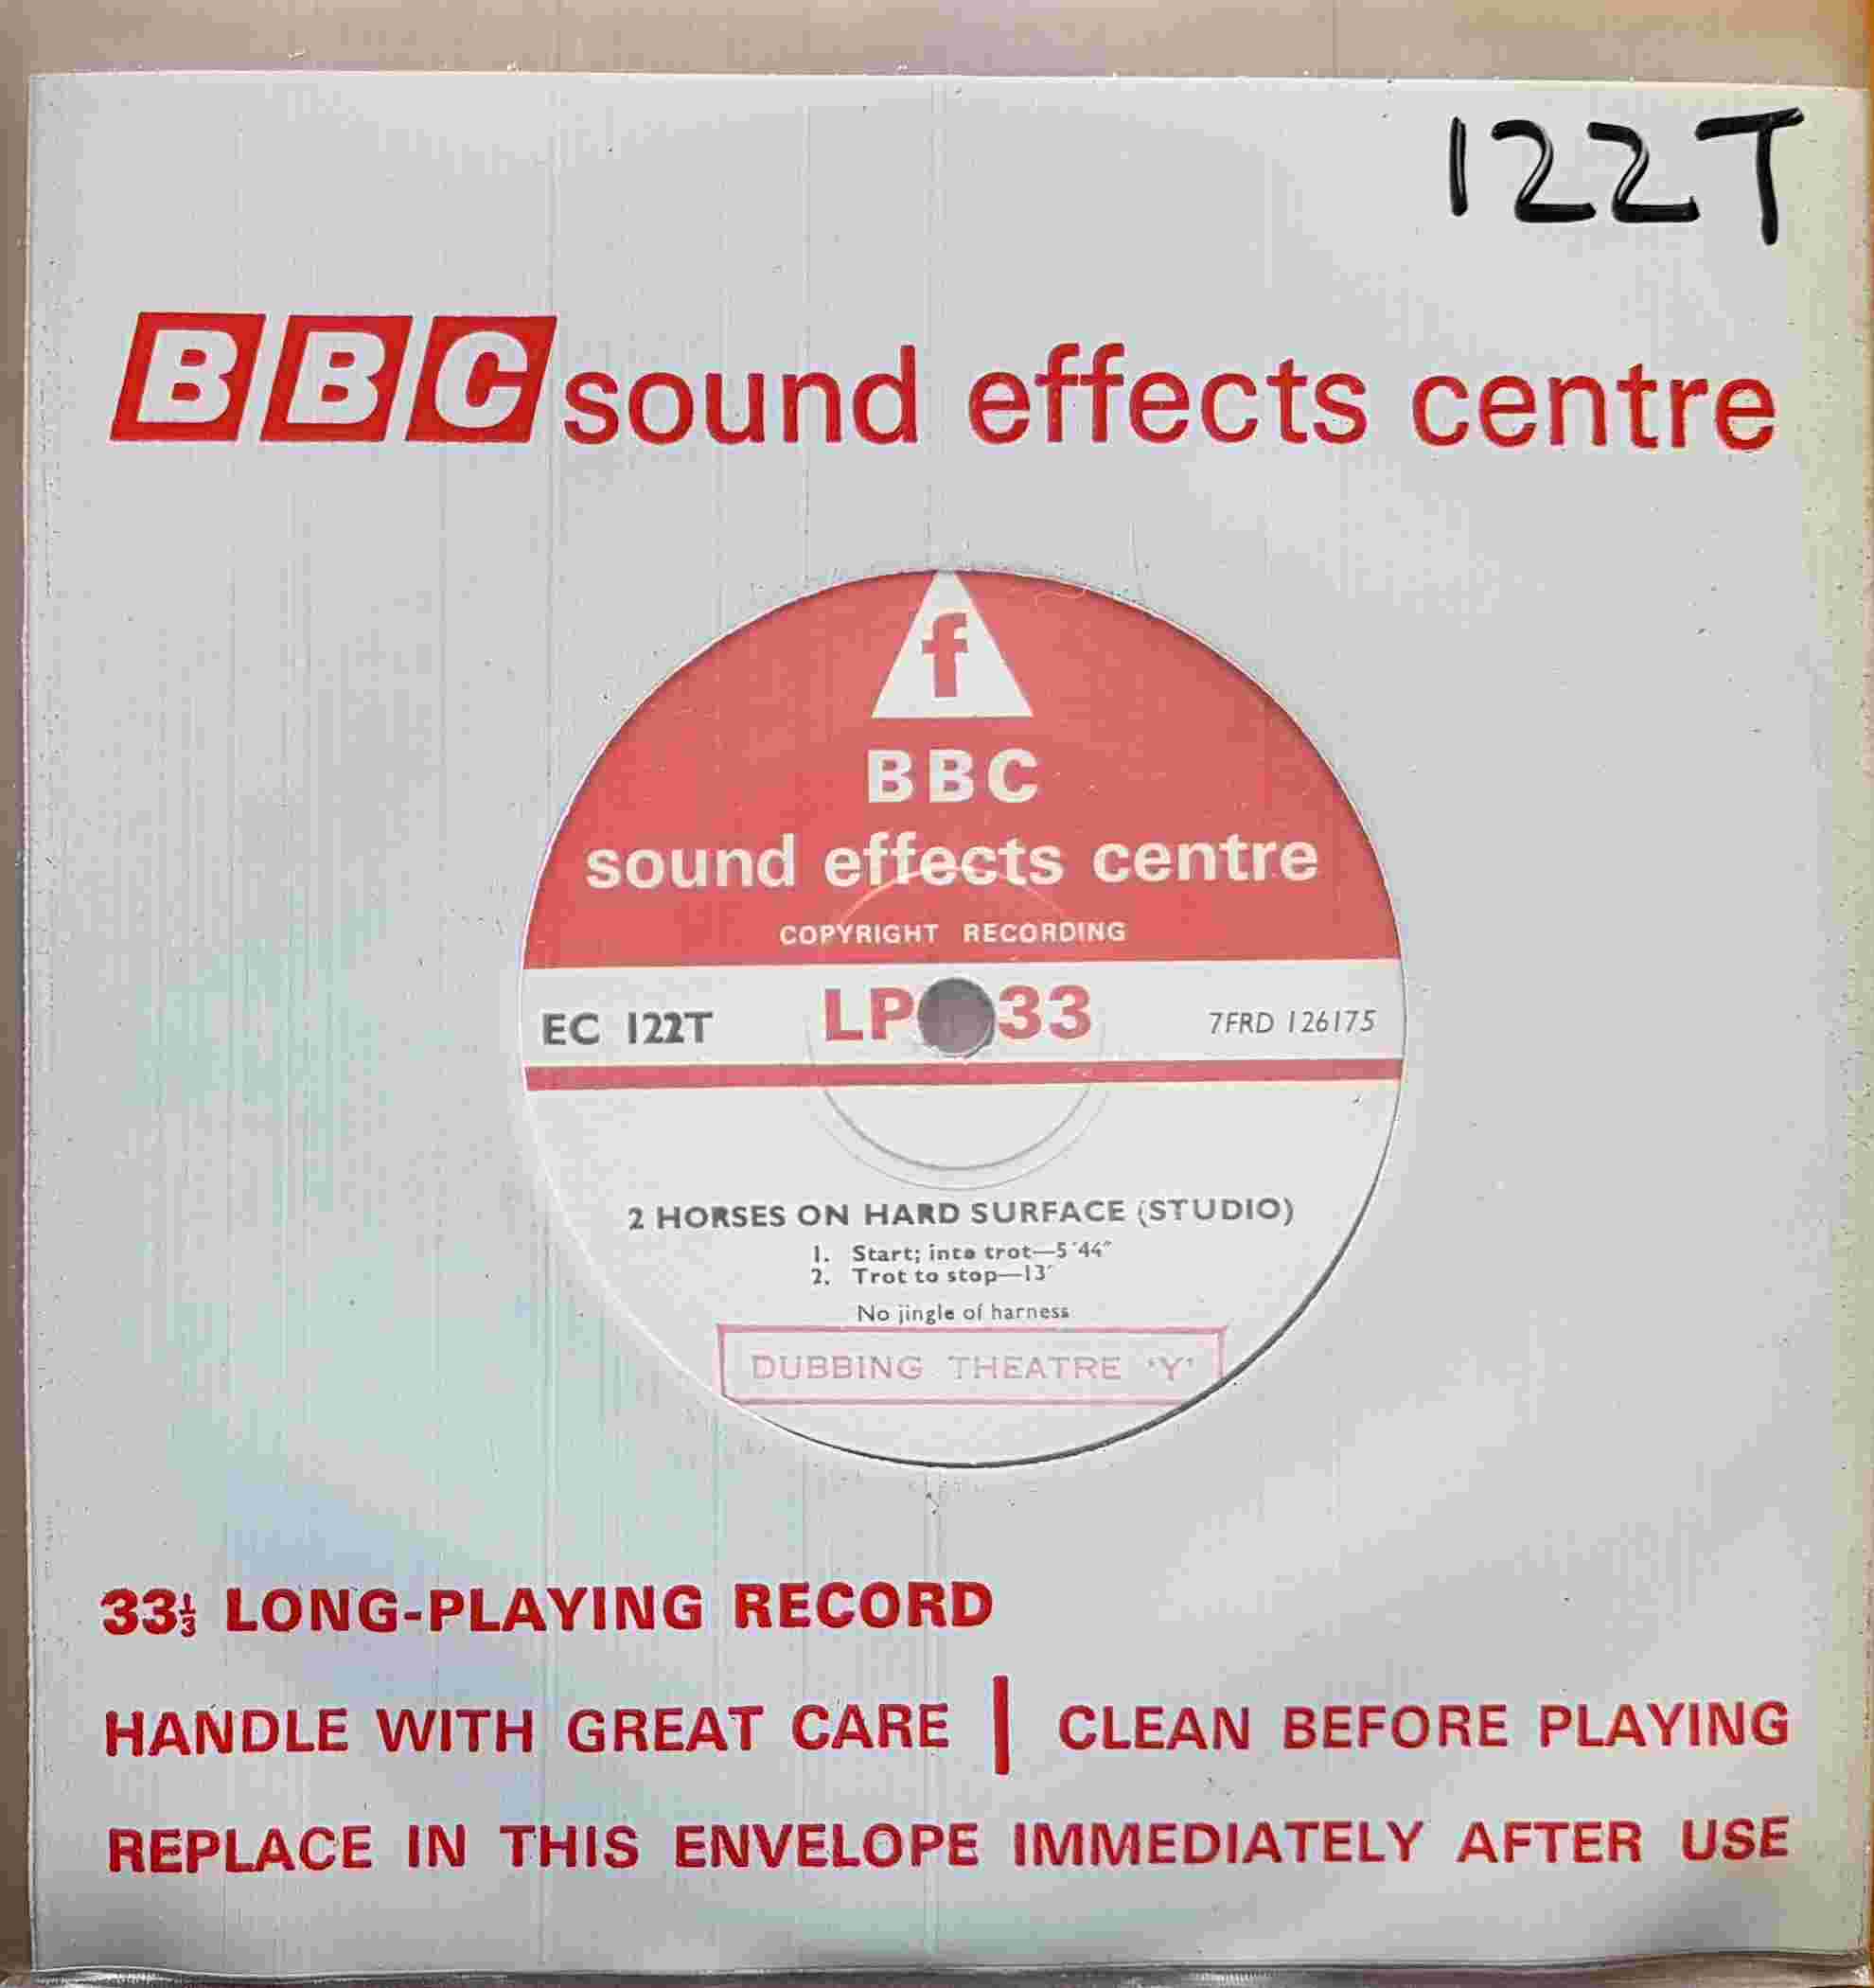 Picture of EC 122T 2 horses on hard surface (Studio) / Horses on hard surface (Studio) by artist Not registered from the BBC singles - Records and Tapes library